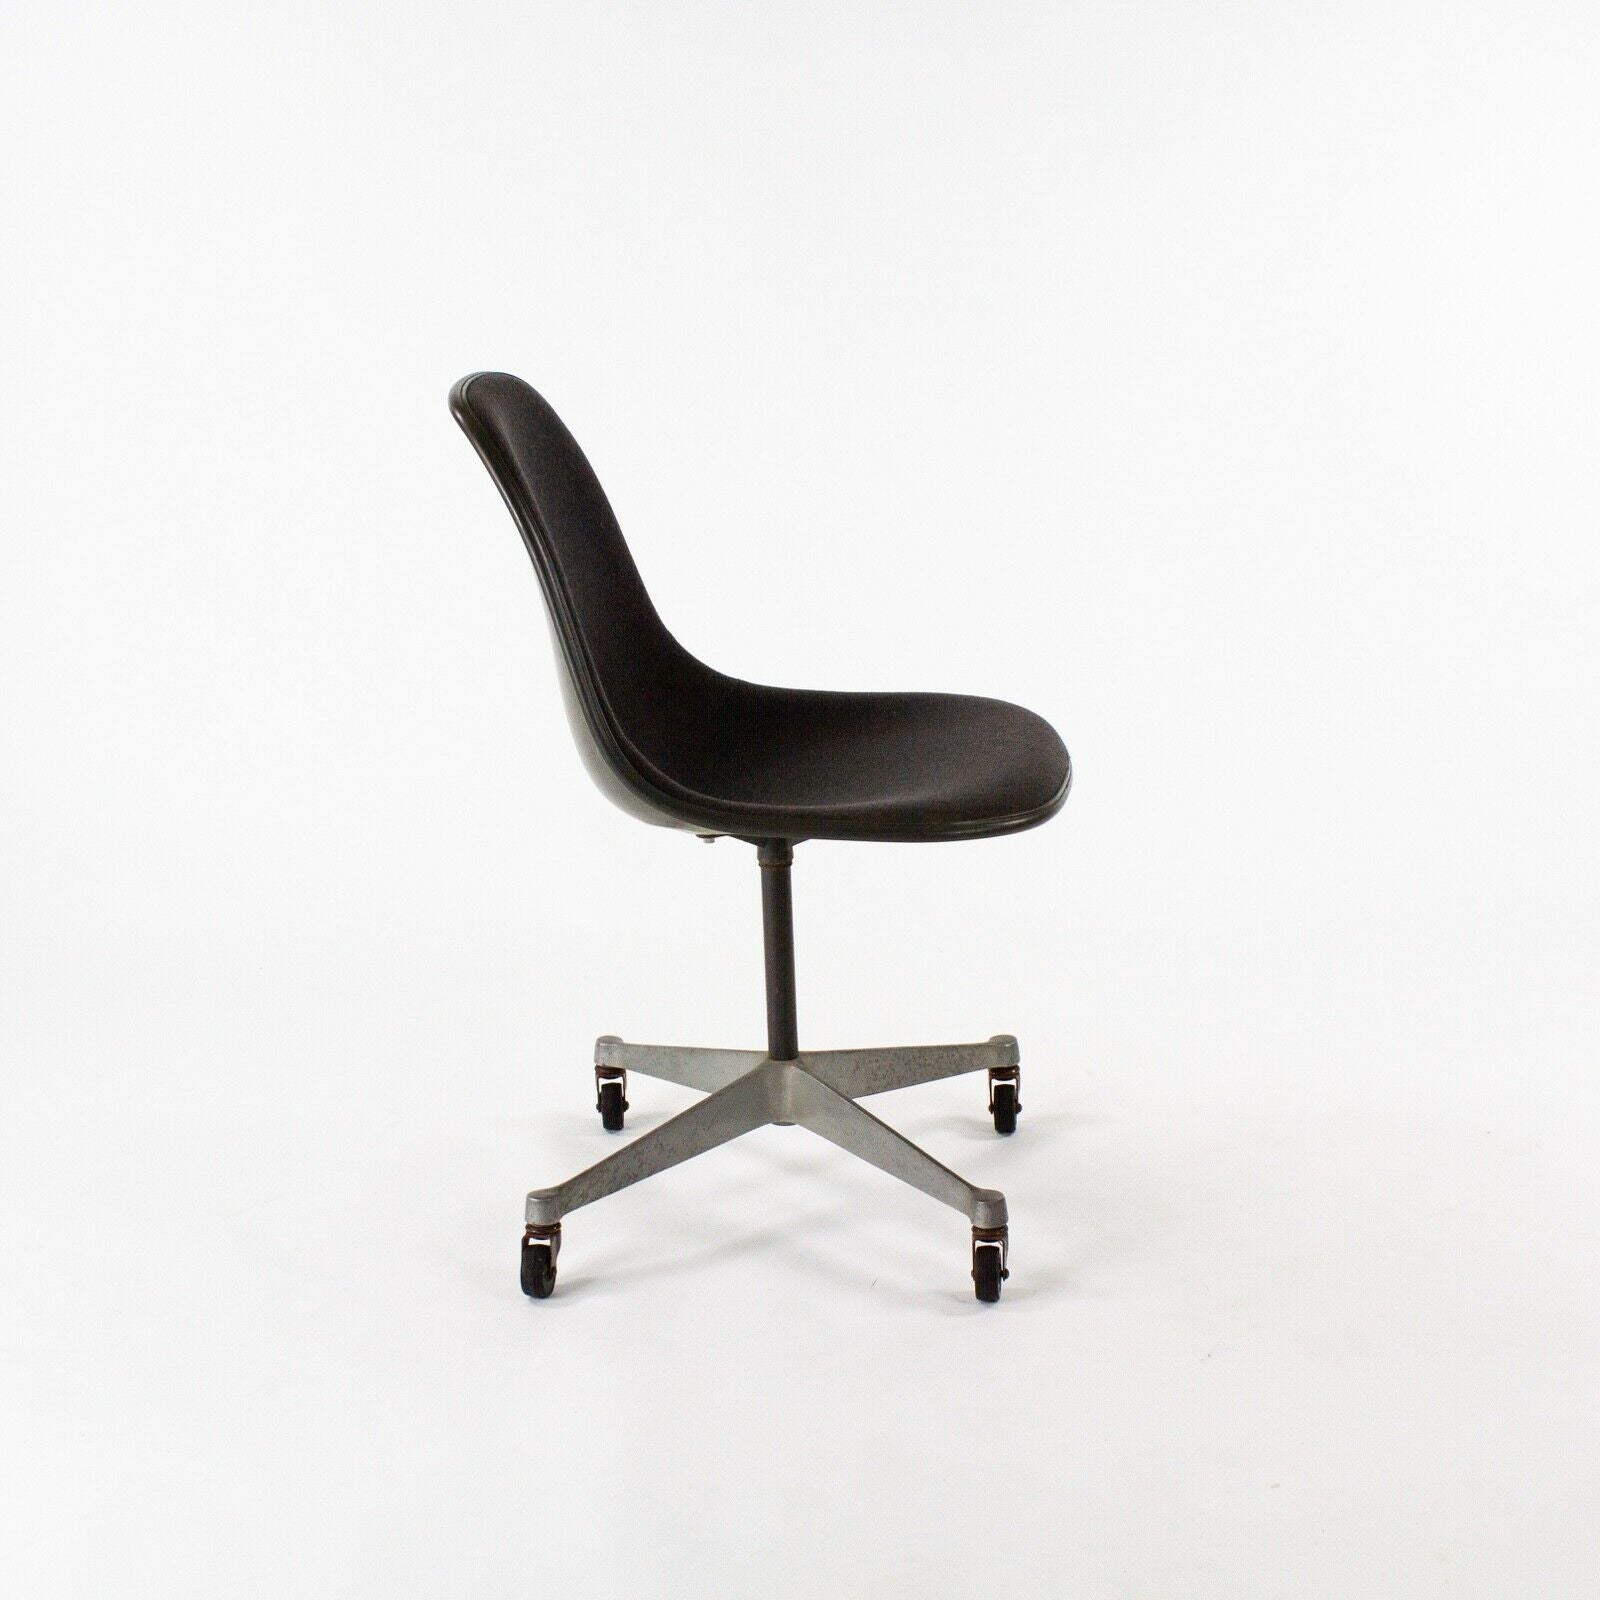 SOLD 1980s Herman Miller Eames Black Fabric Upholstered Side Shell Chair with Wheels